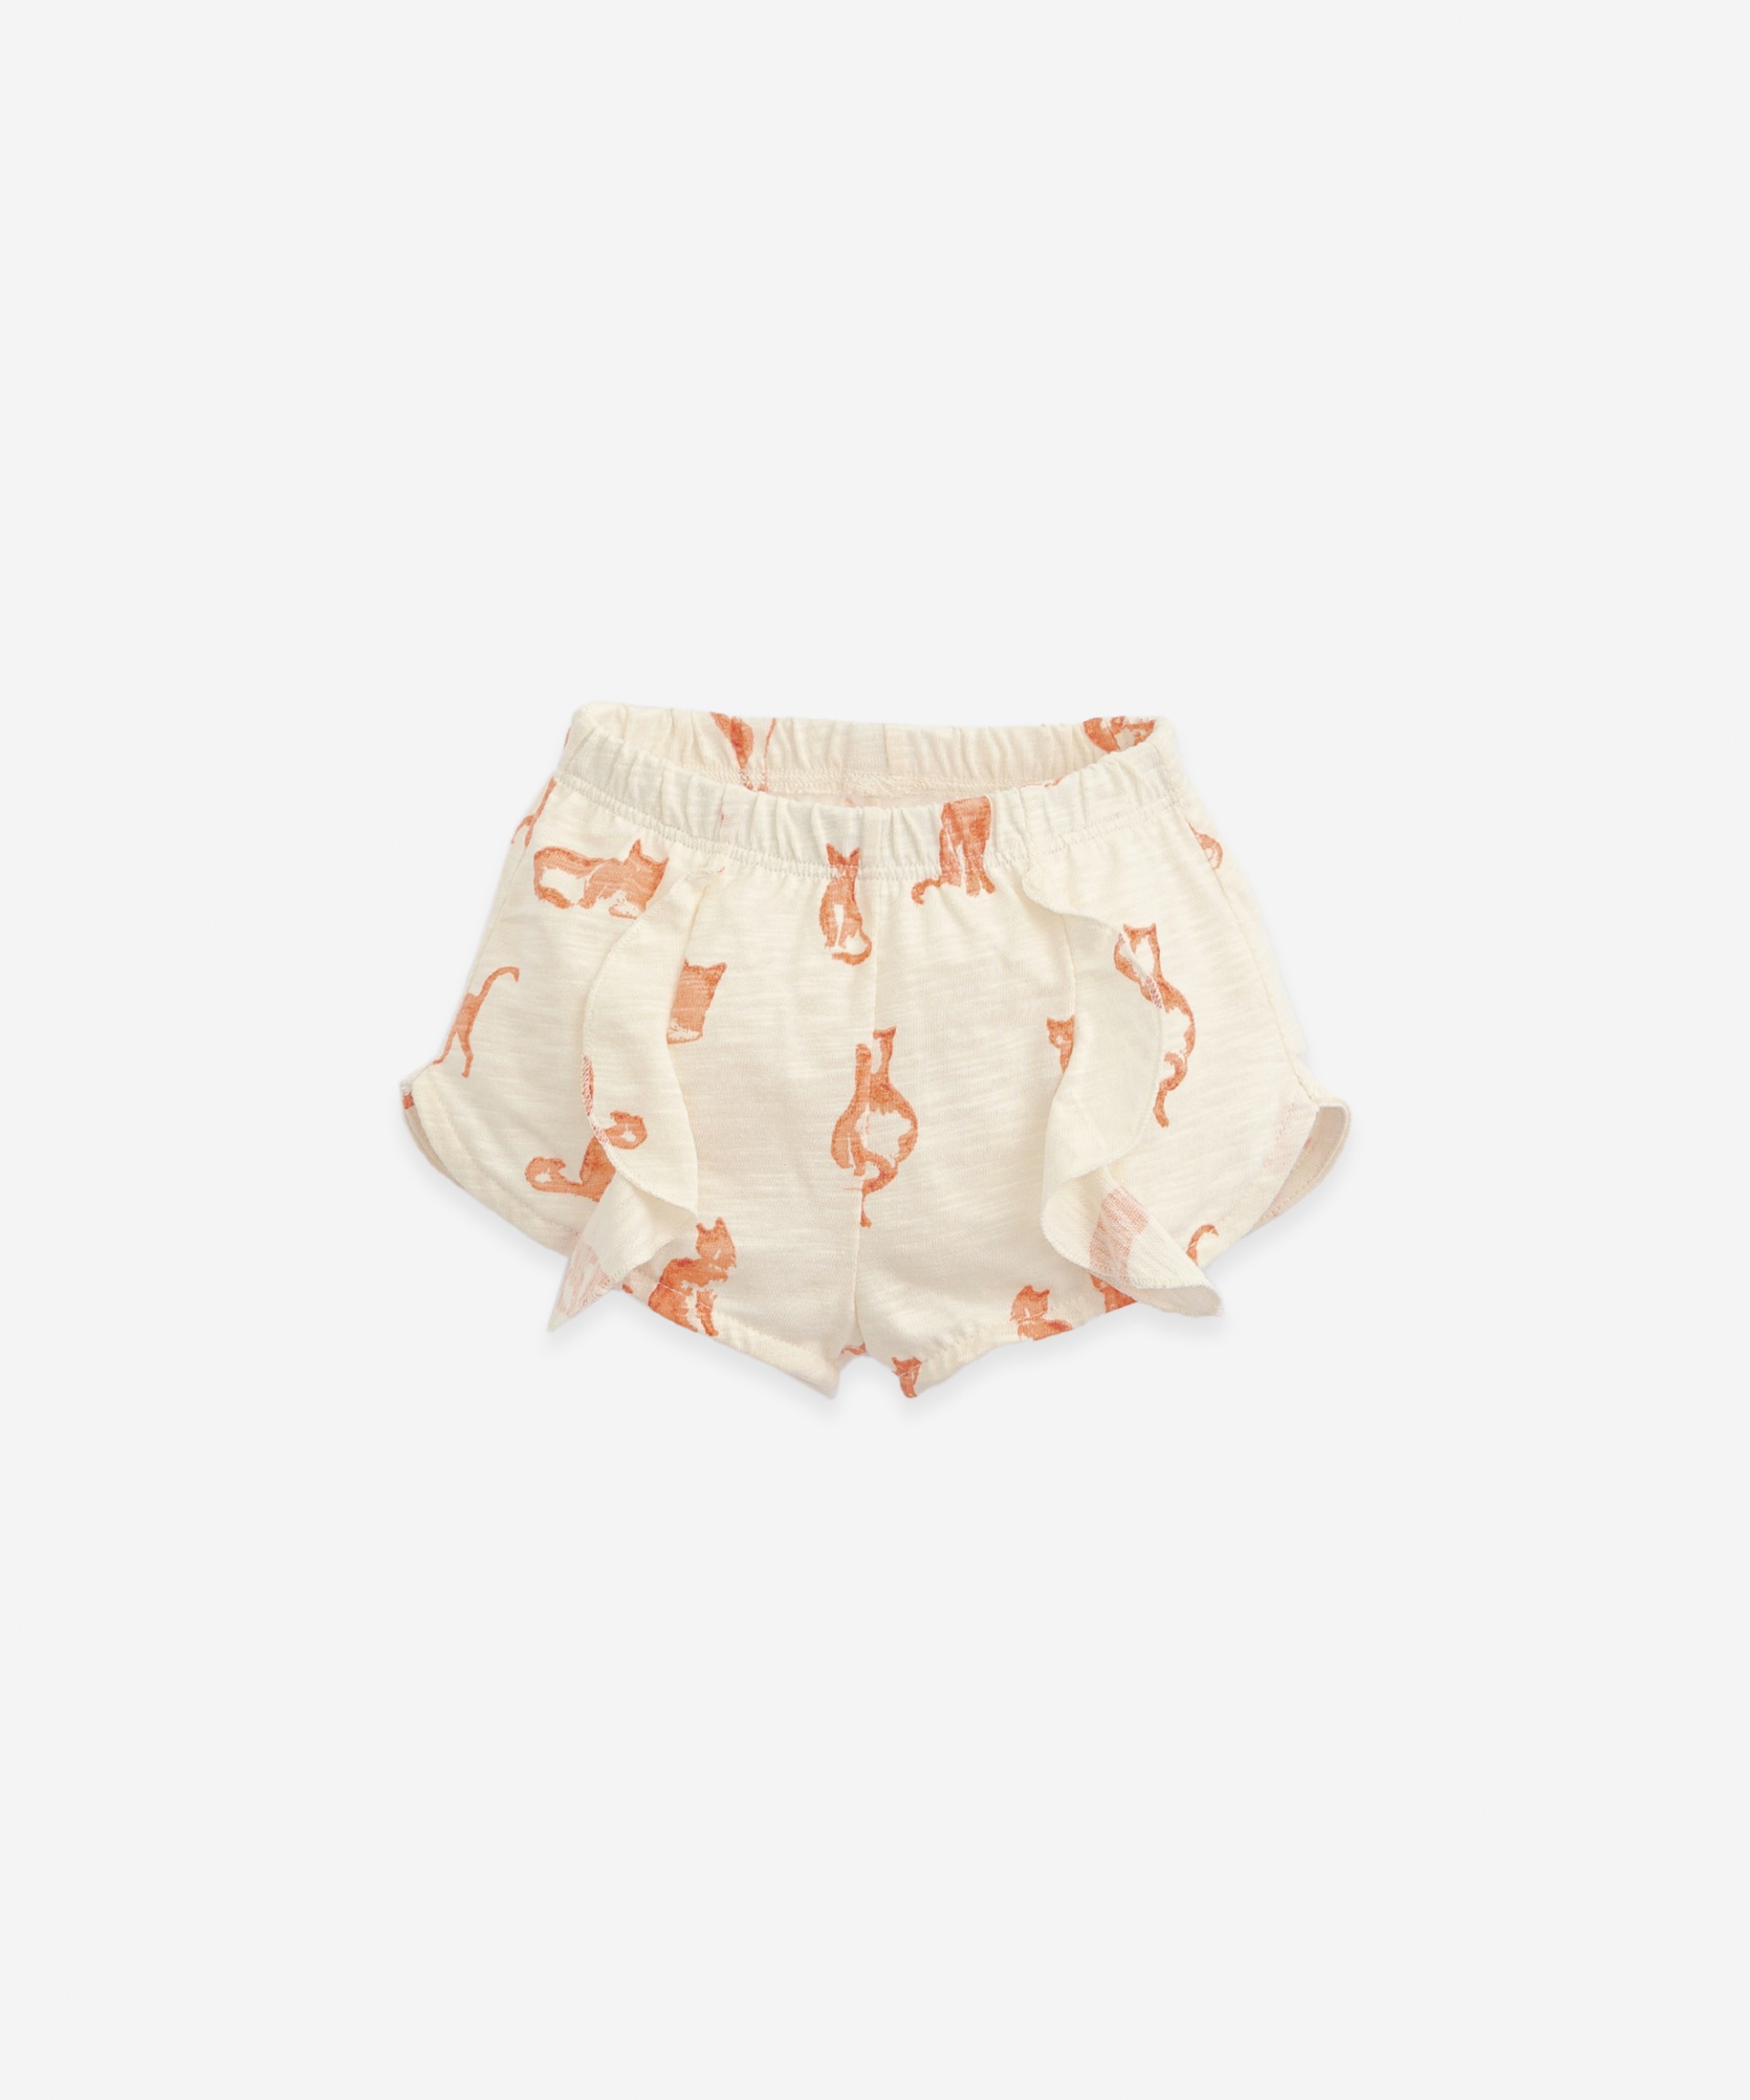 Shorts in organic cotton with a print | Botany